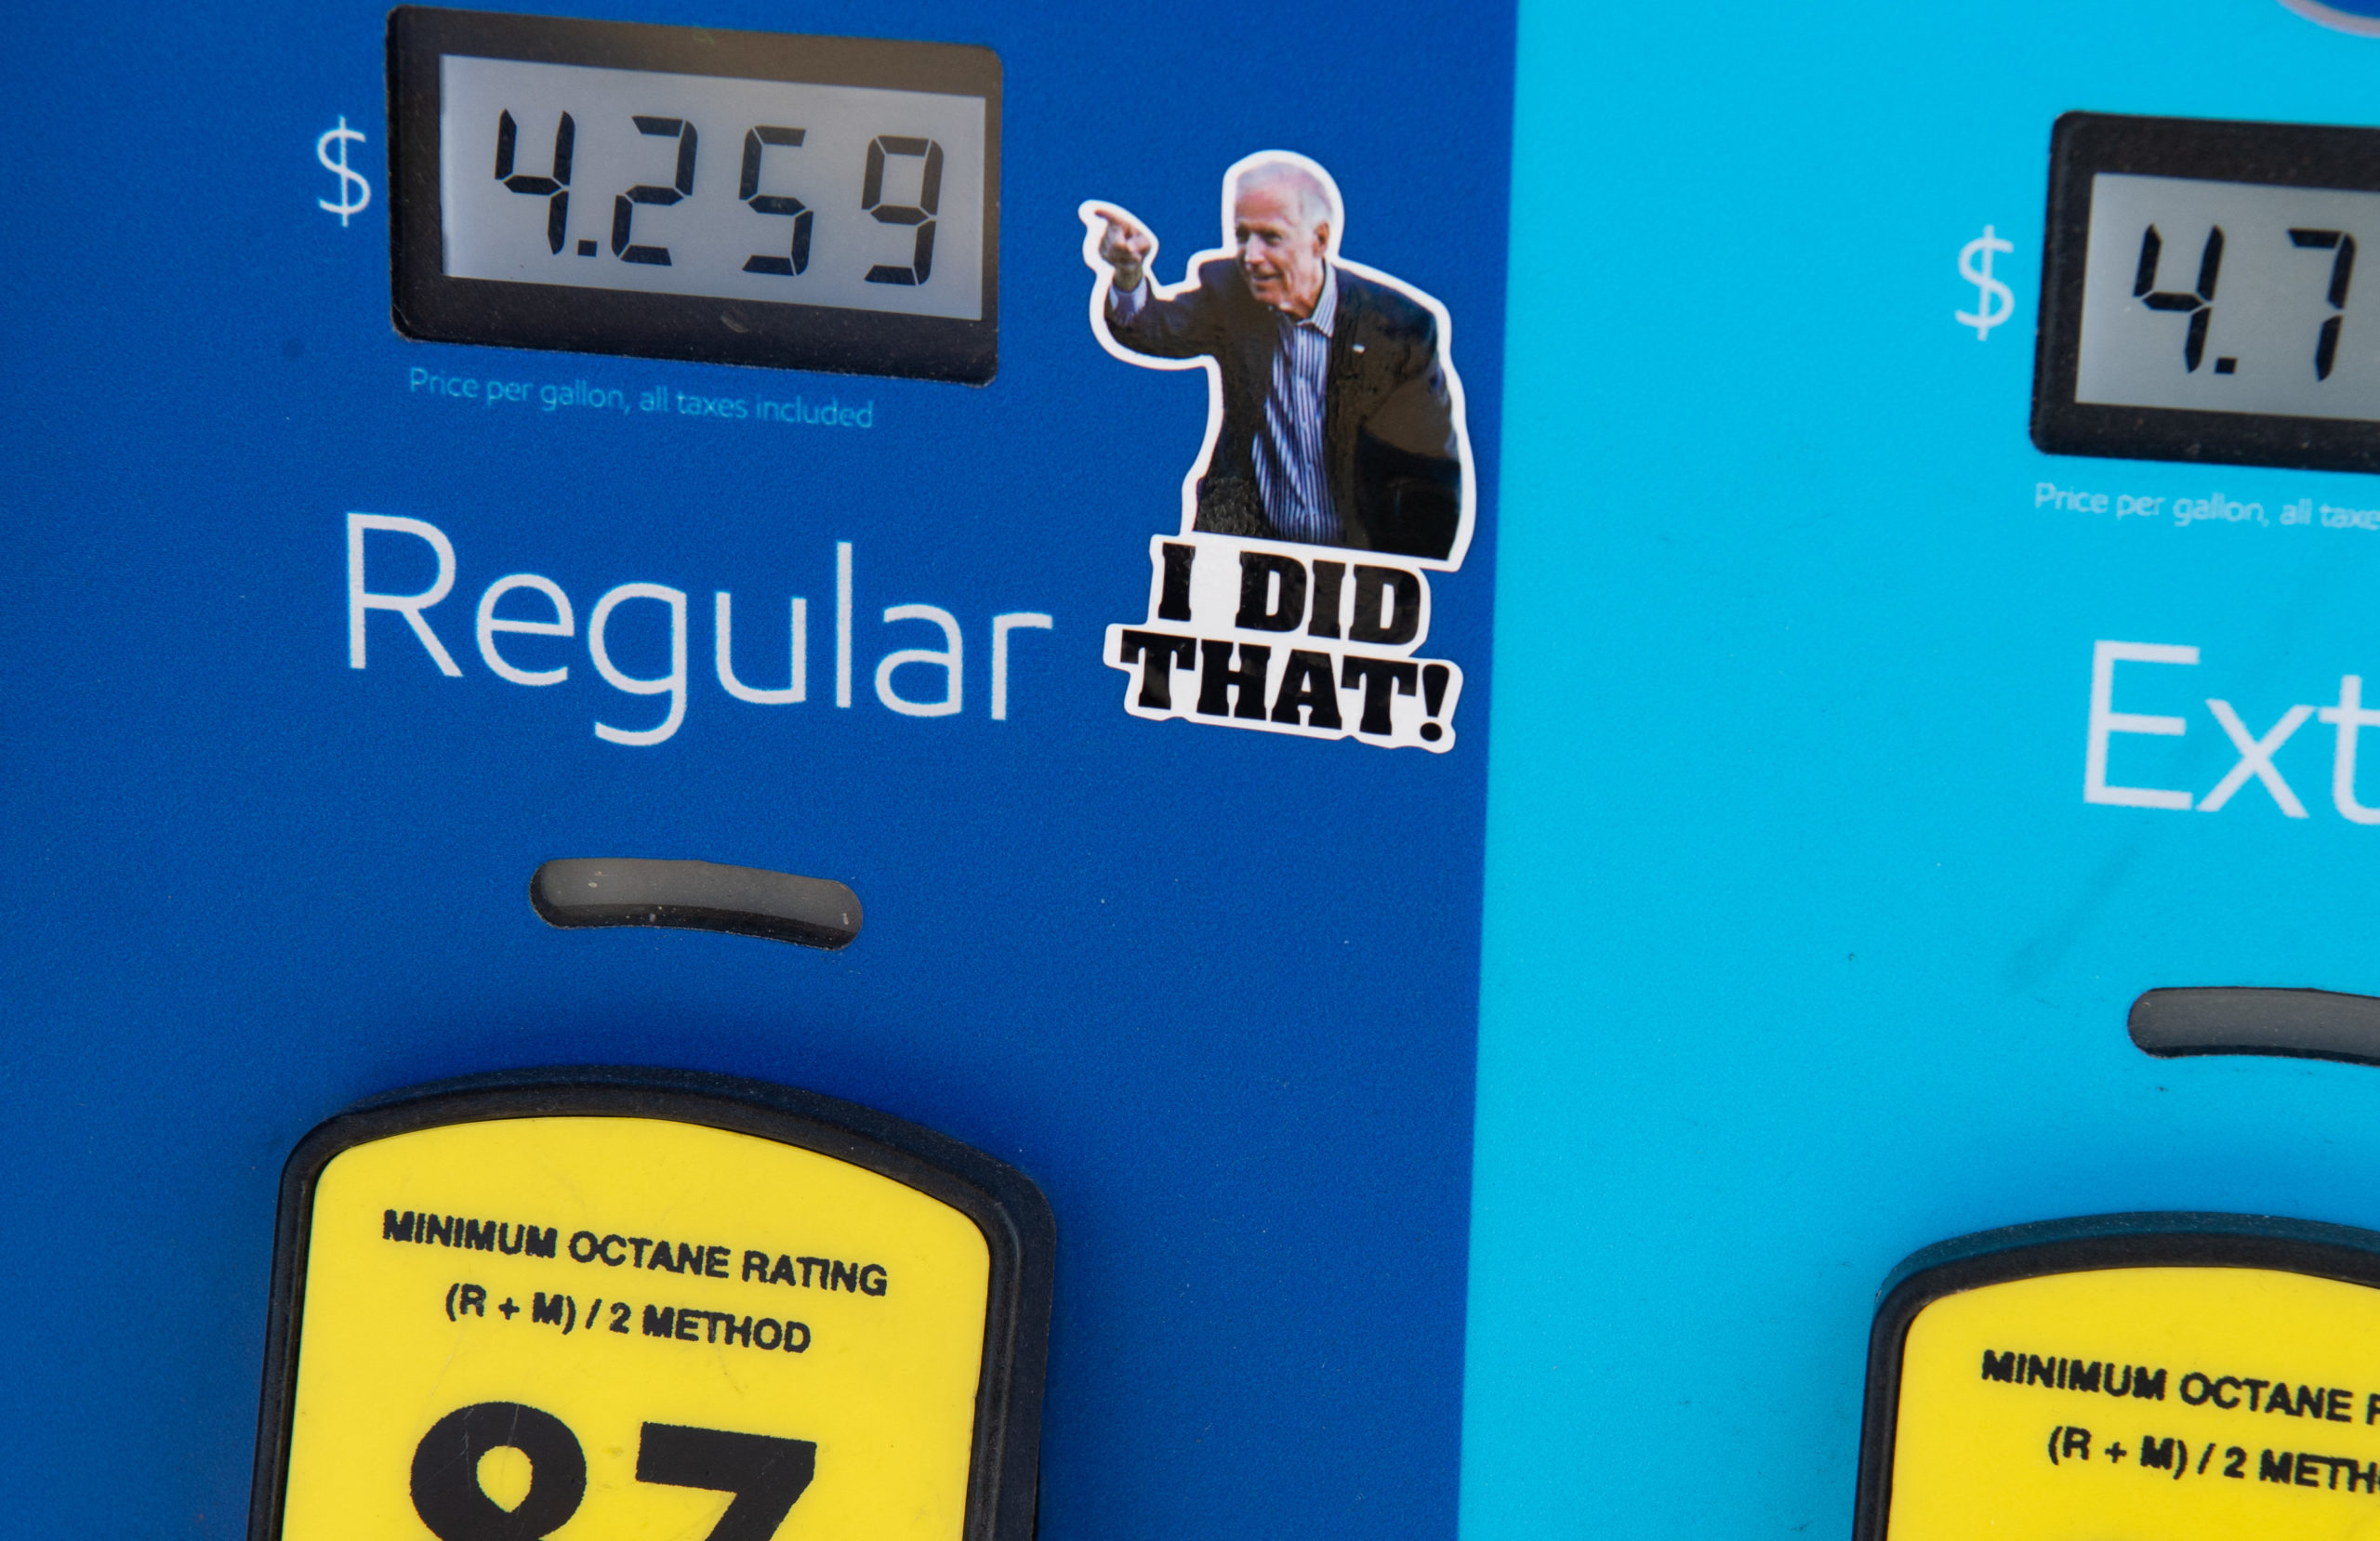 A gas pump displays current fuel prices along with a sticker of President Joe Biden at a gas station in Arlington, Virginia on March 16. (Saul Loeb/AFP via Getty Images)